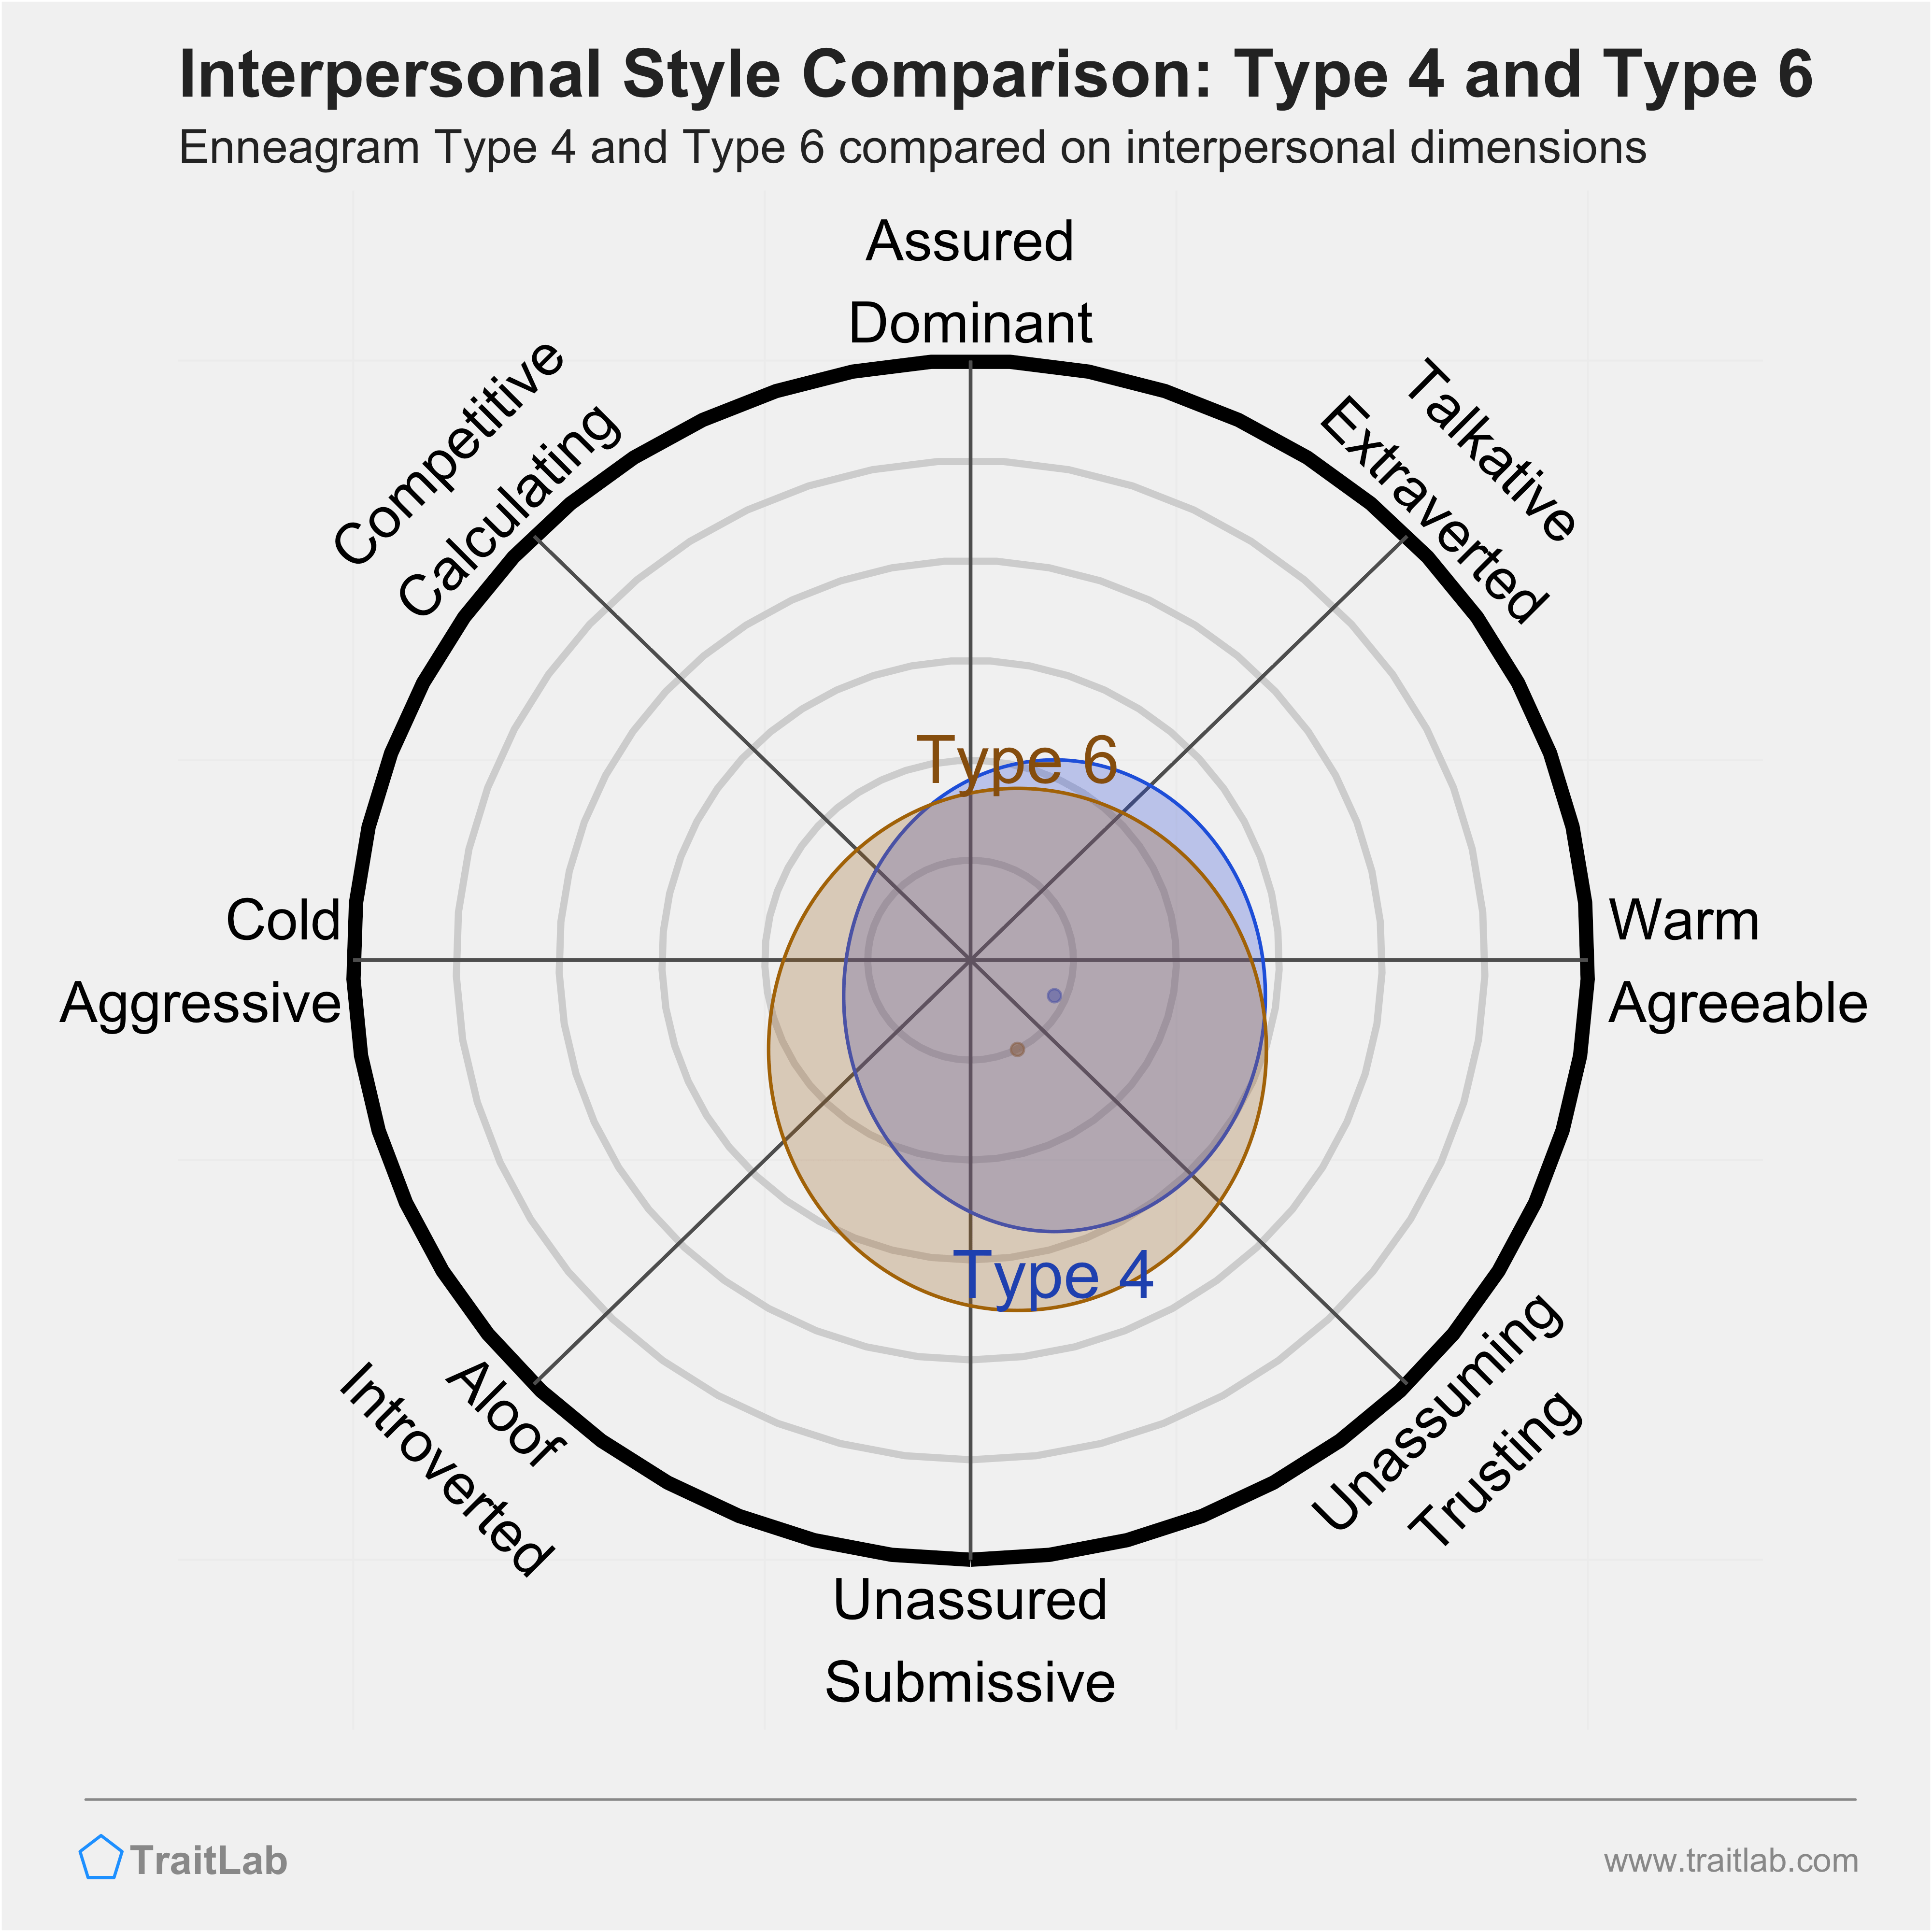 Enneagram Type 4 and Type 6 comparison across interpersonal dimensions